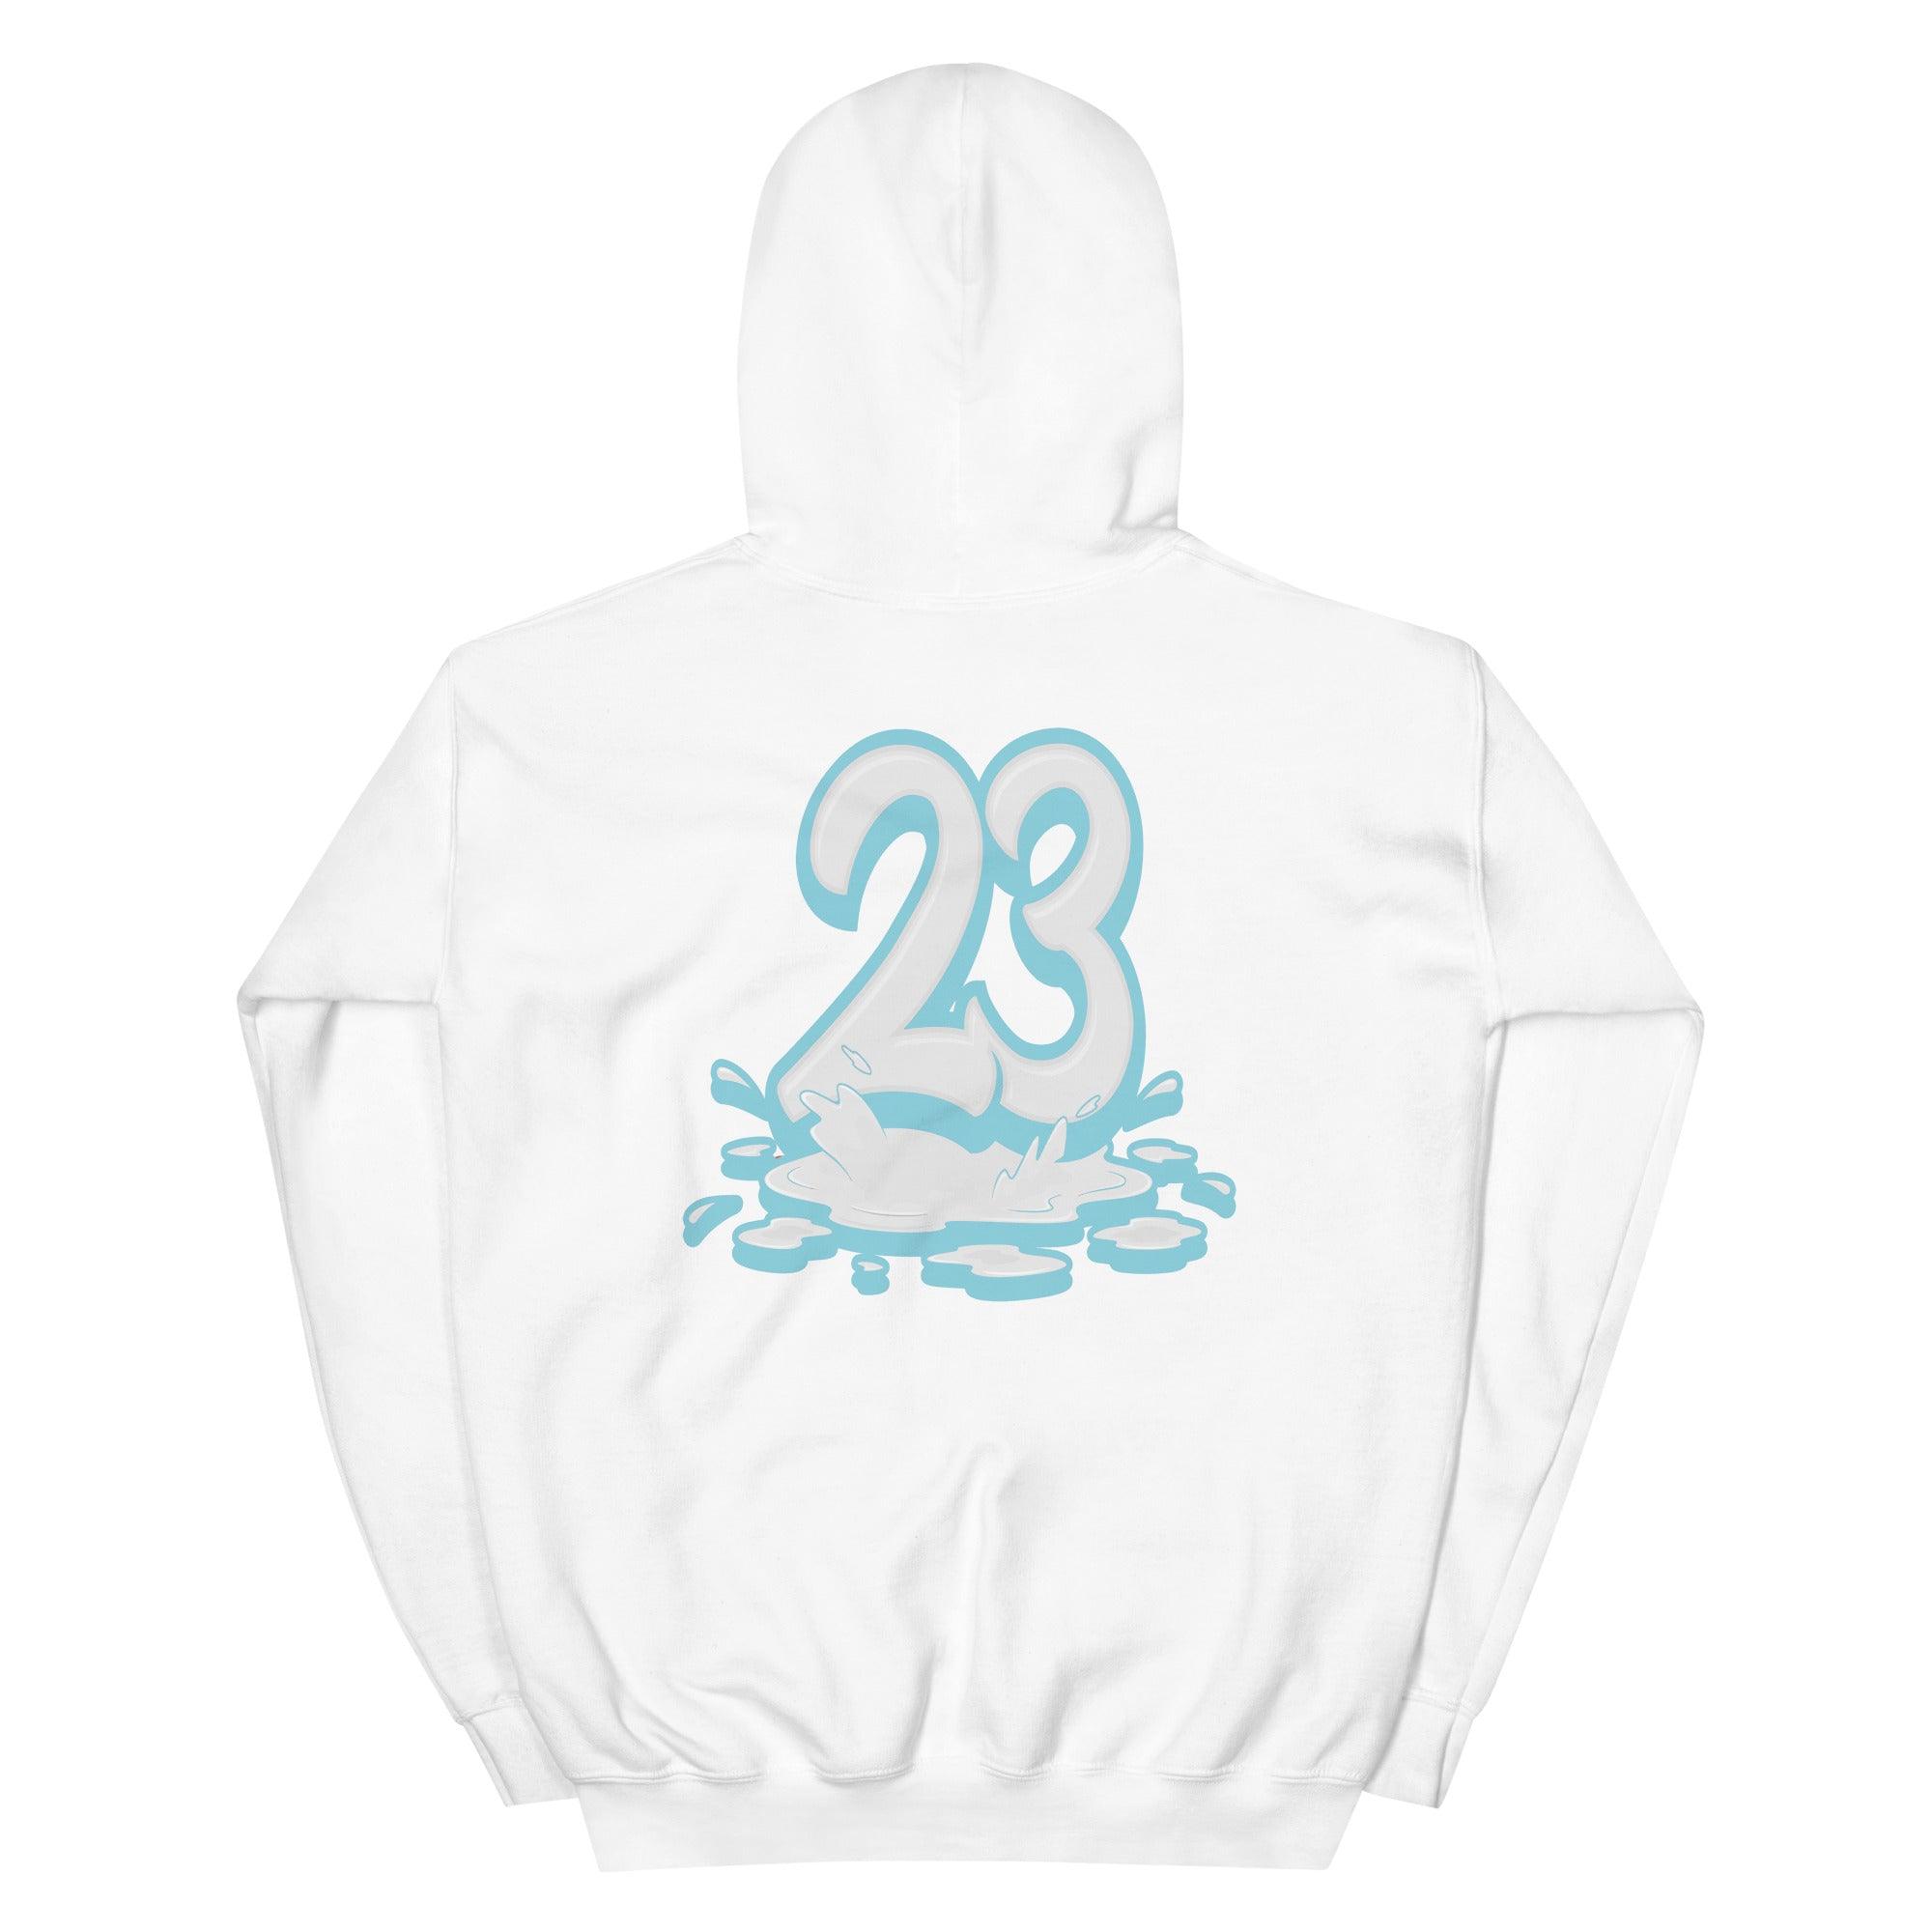 White 23 Melting Hoodie Dunk Low Essential Paisley Pack Worn Blue photo